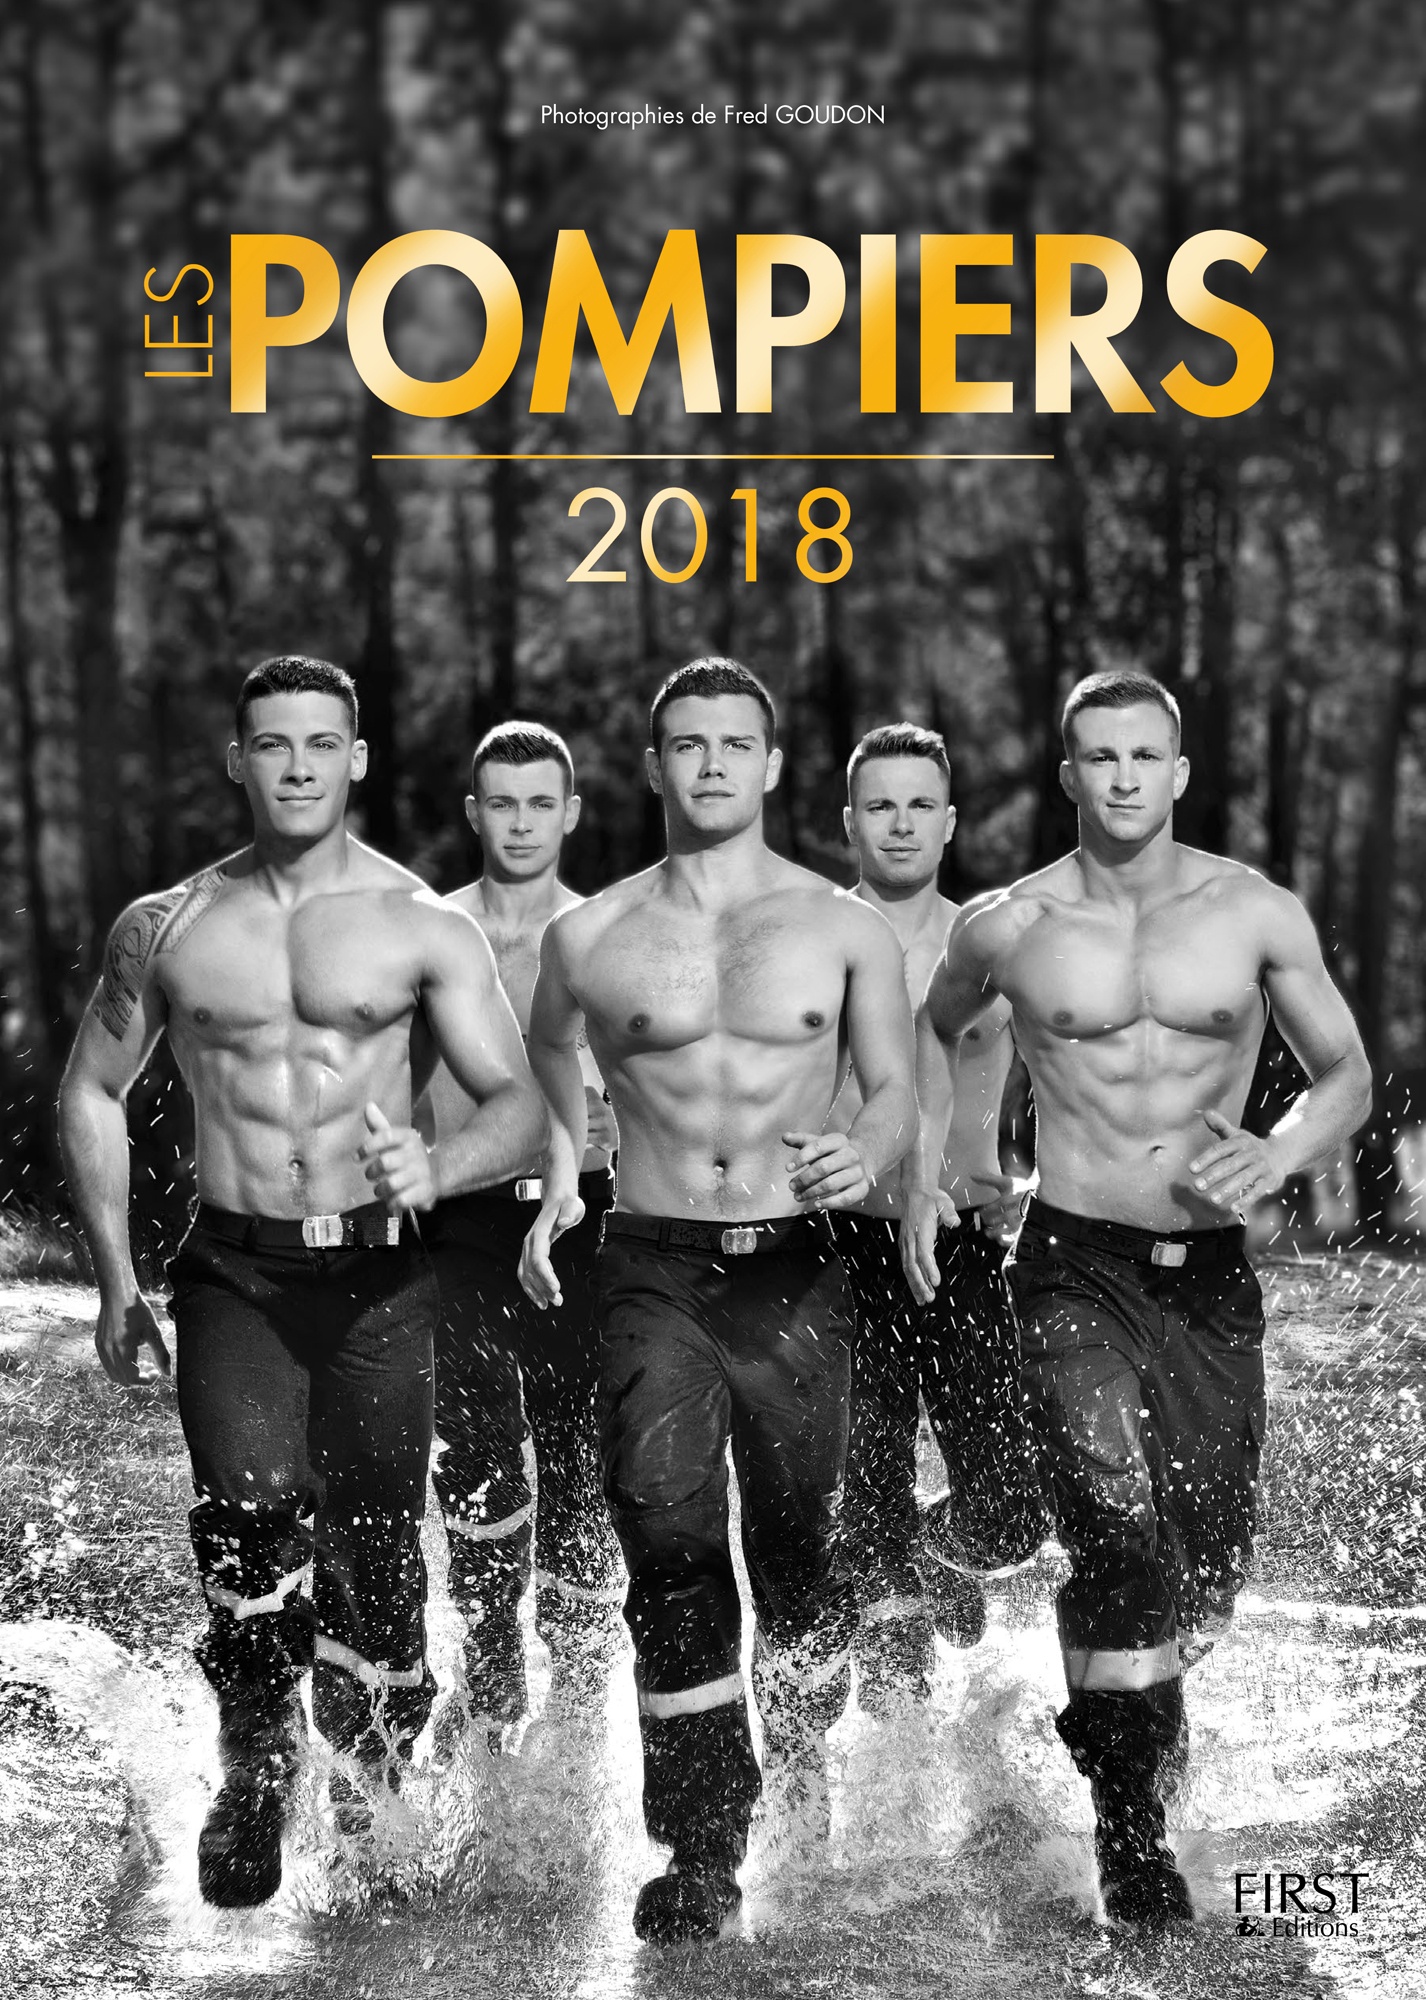 Les POMPIERS  2018 FIRST copyright Fred Goudon cover  (2)